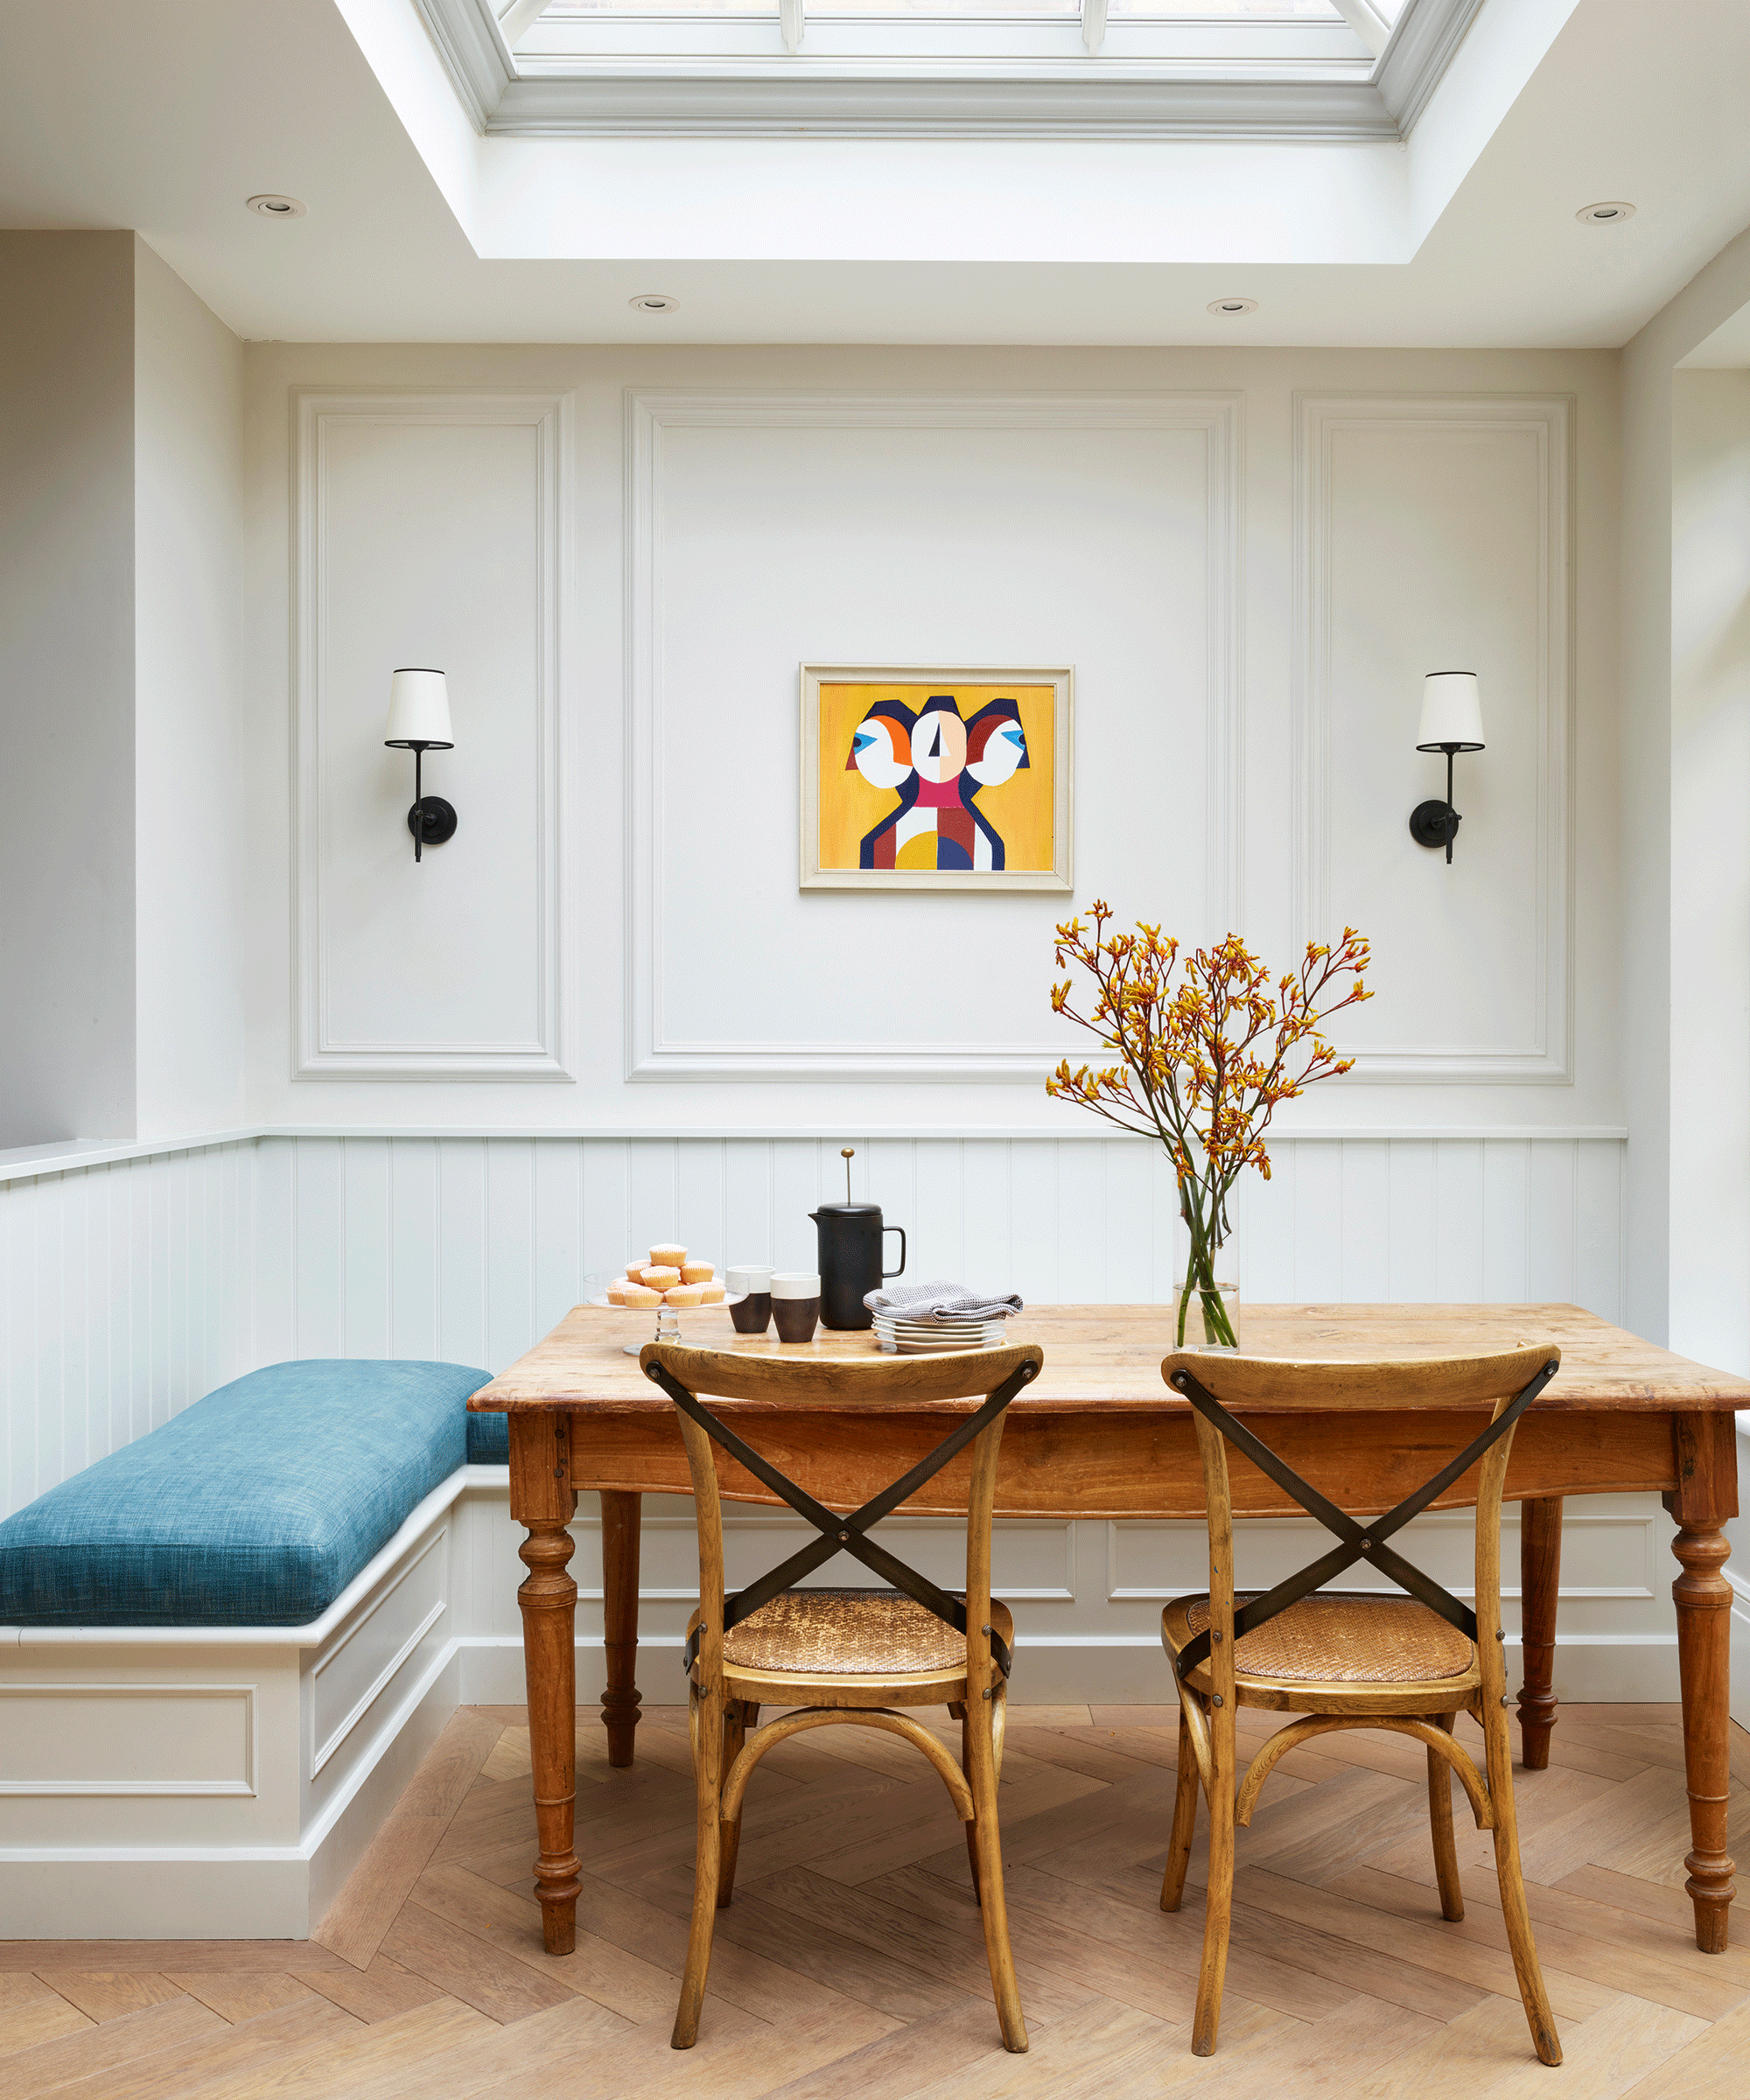 banquette seating with blue upholstery